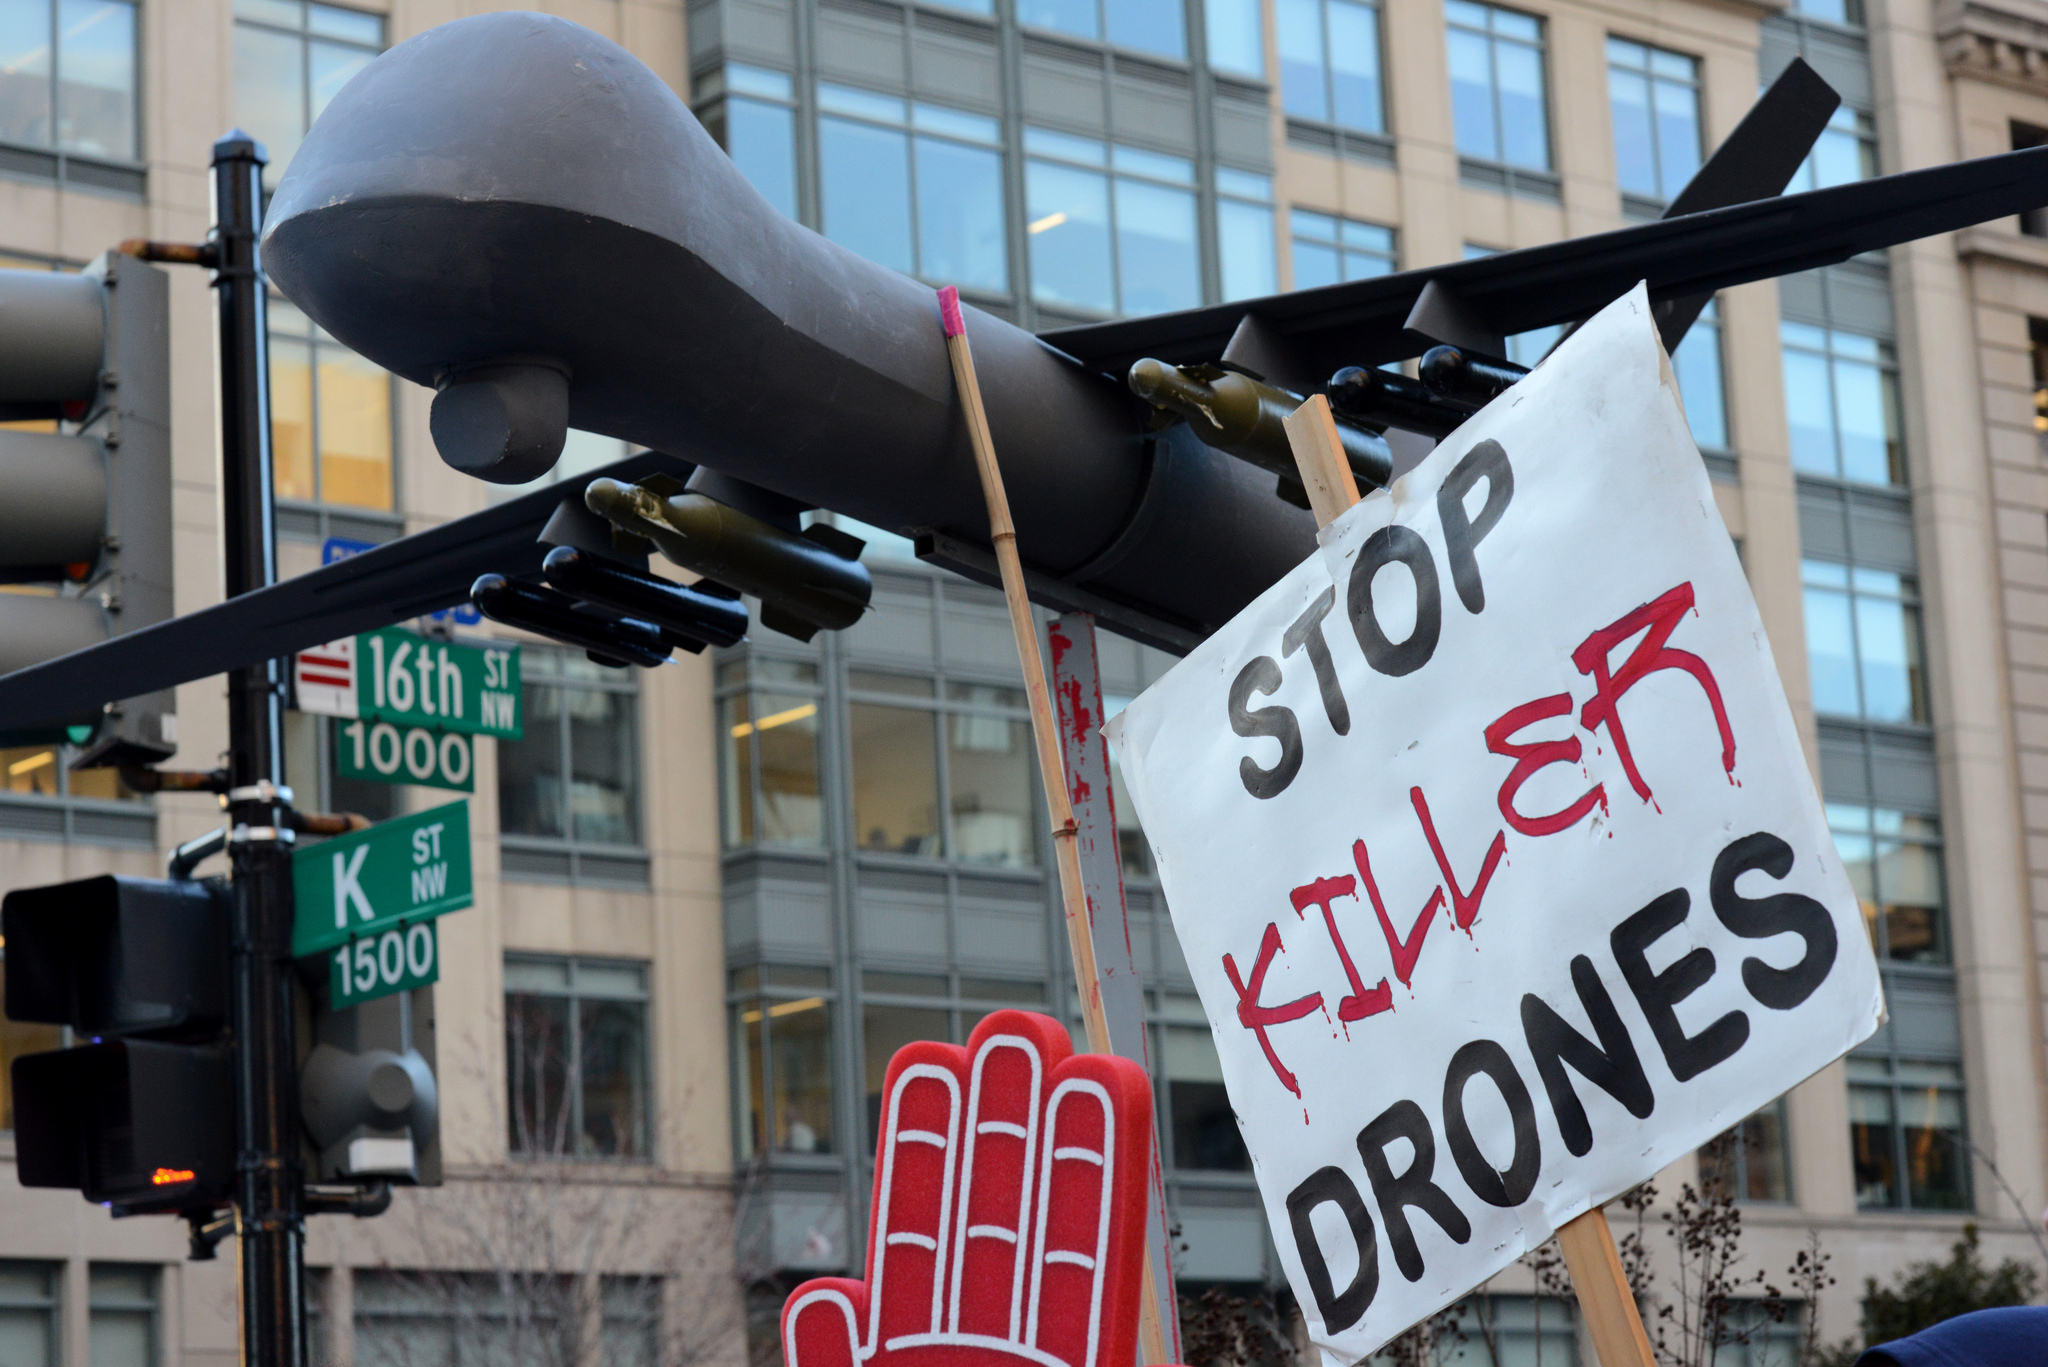 Armed Drones: the European Countries’ Interests at Stake